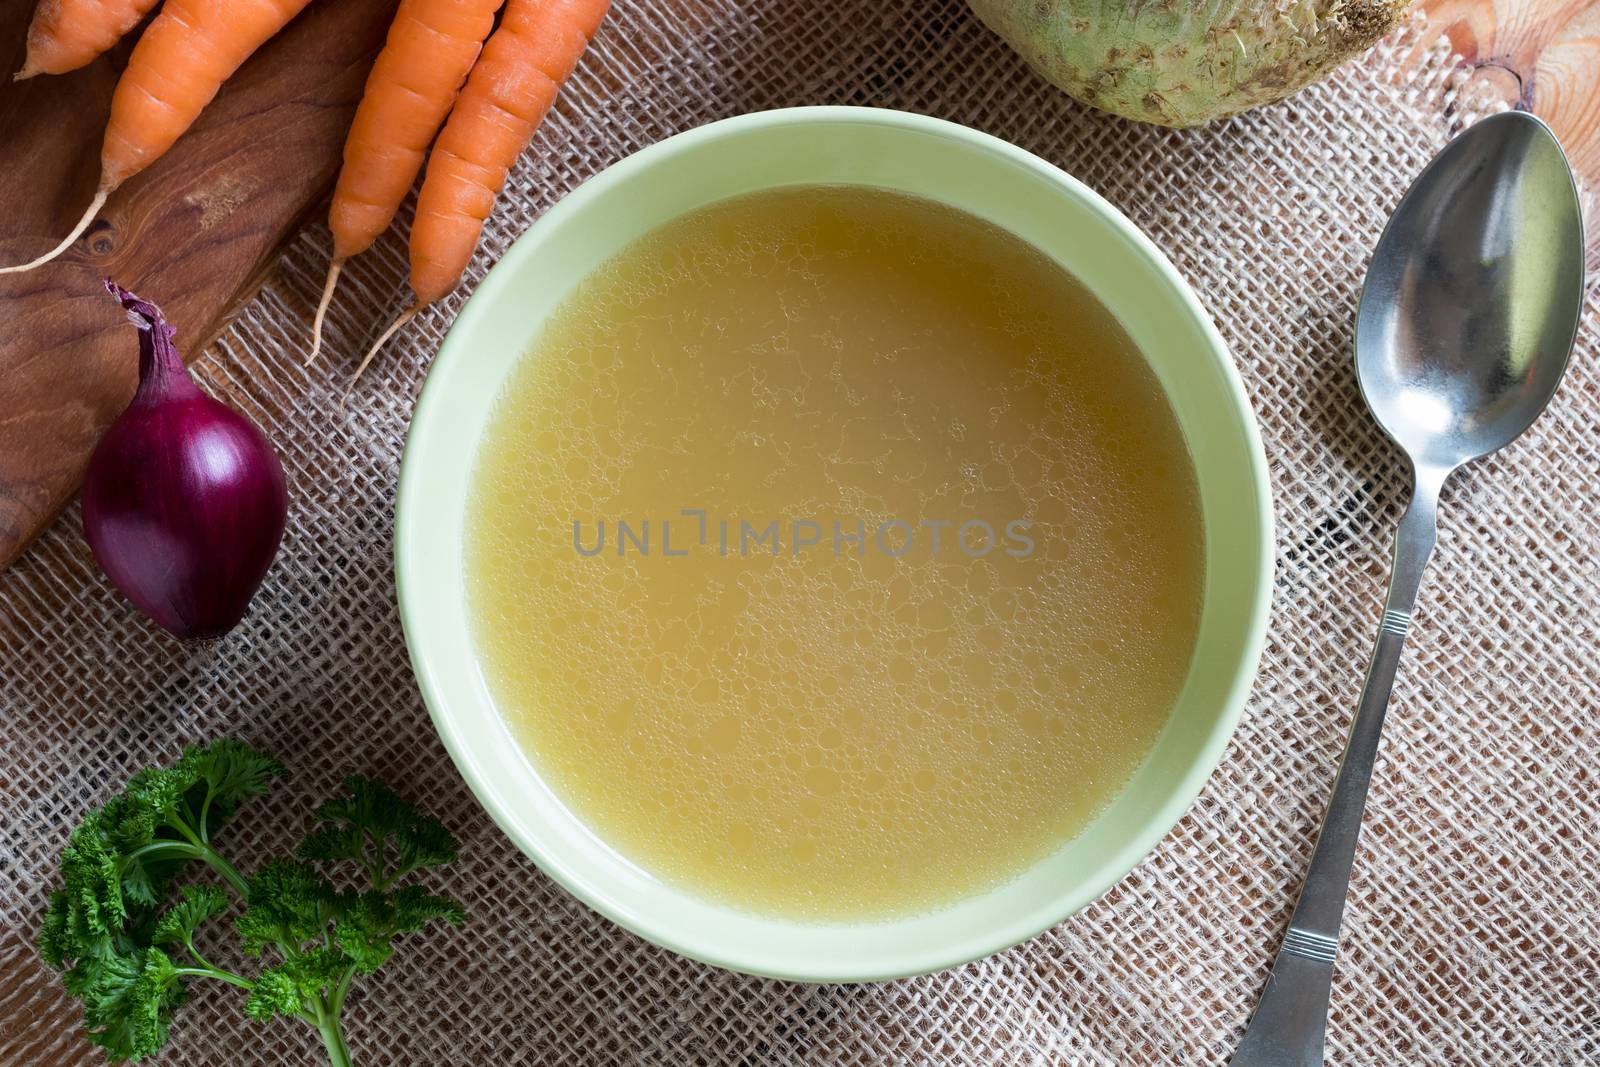 Chicken bone broth in a green soup bowl with vegetables in the background